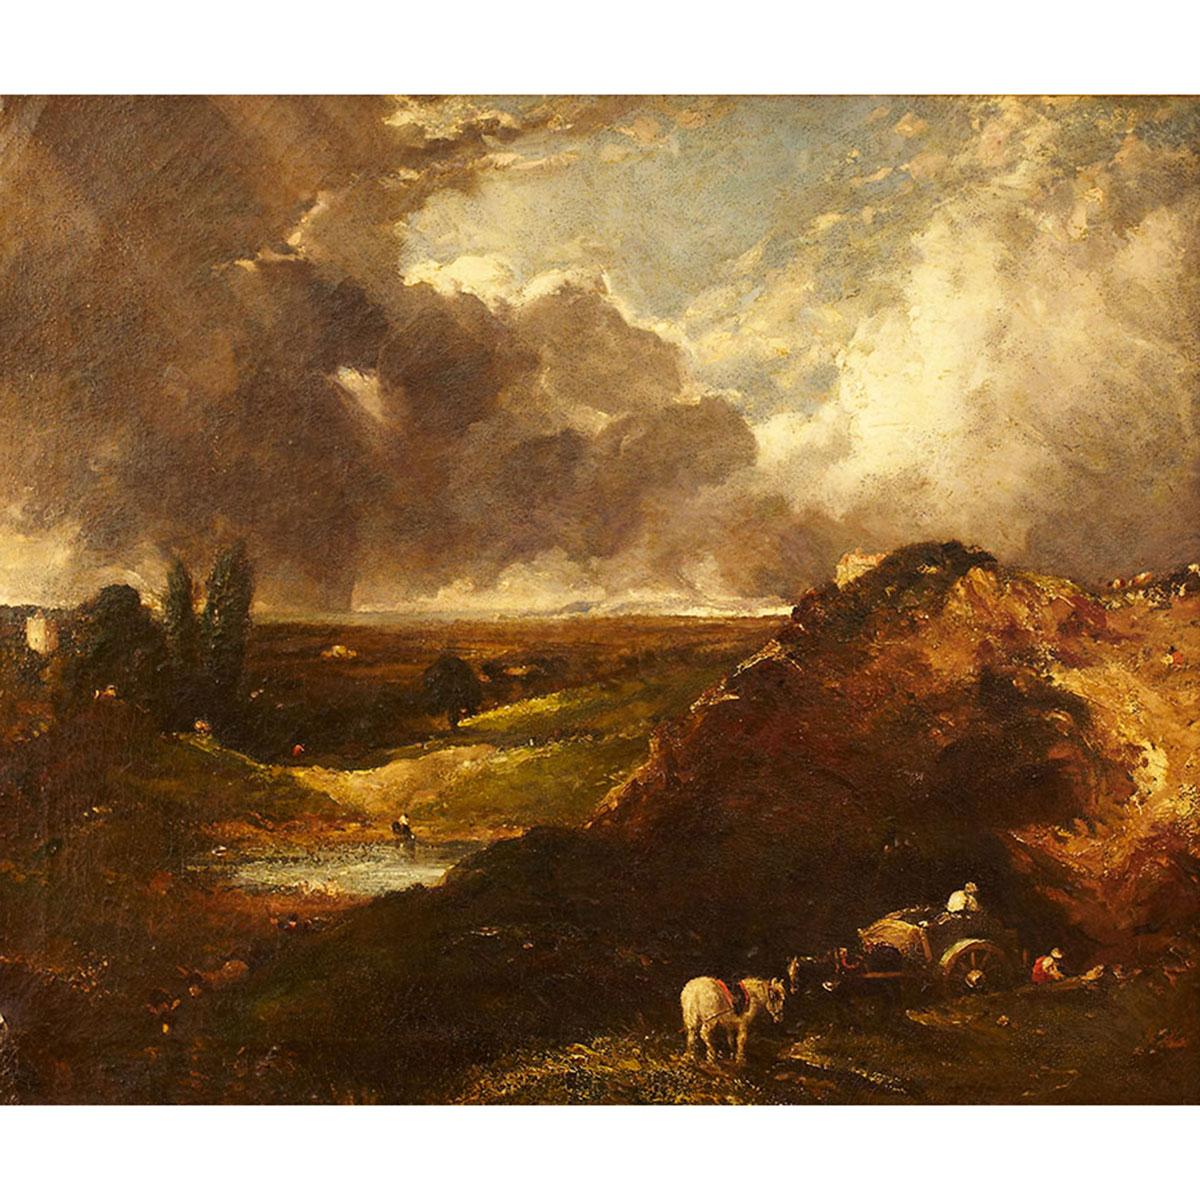 After John Constable (1776-1837)